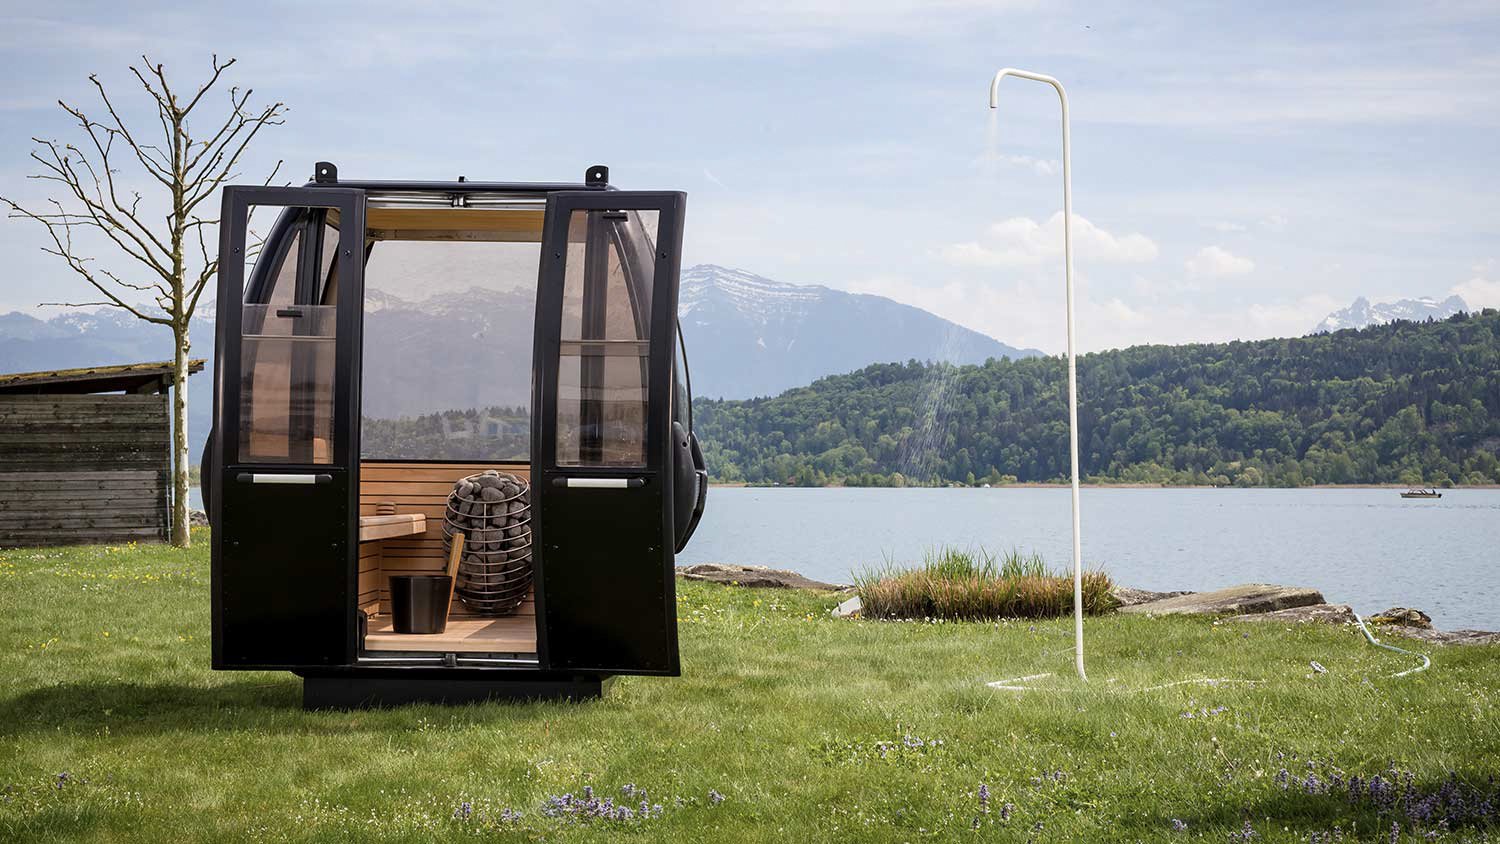 Two Swiss designers breathe new life into retired gondolas by turning them into sleek, customizable saunas. The interiors are gutted, and the exteriors receive a brand-new paint job—in any color of your choice.